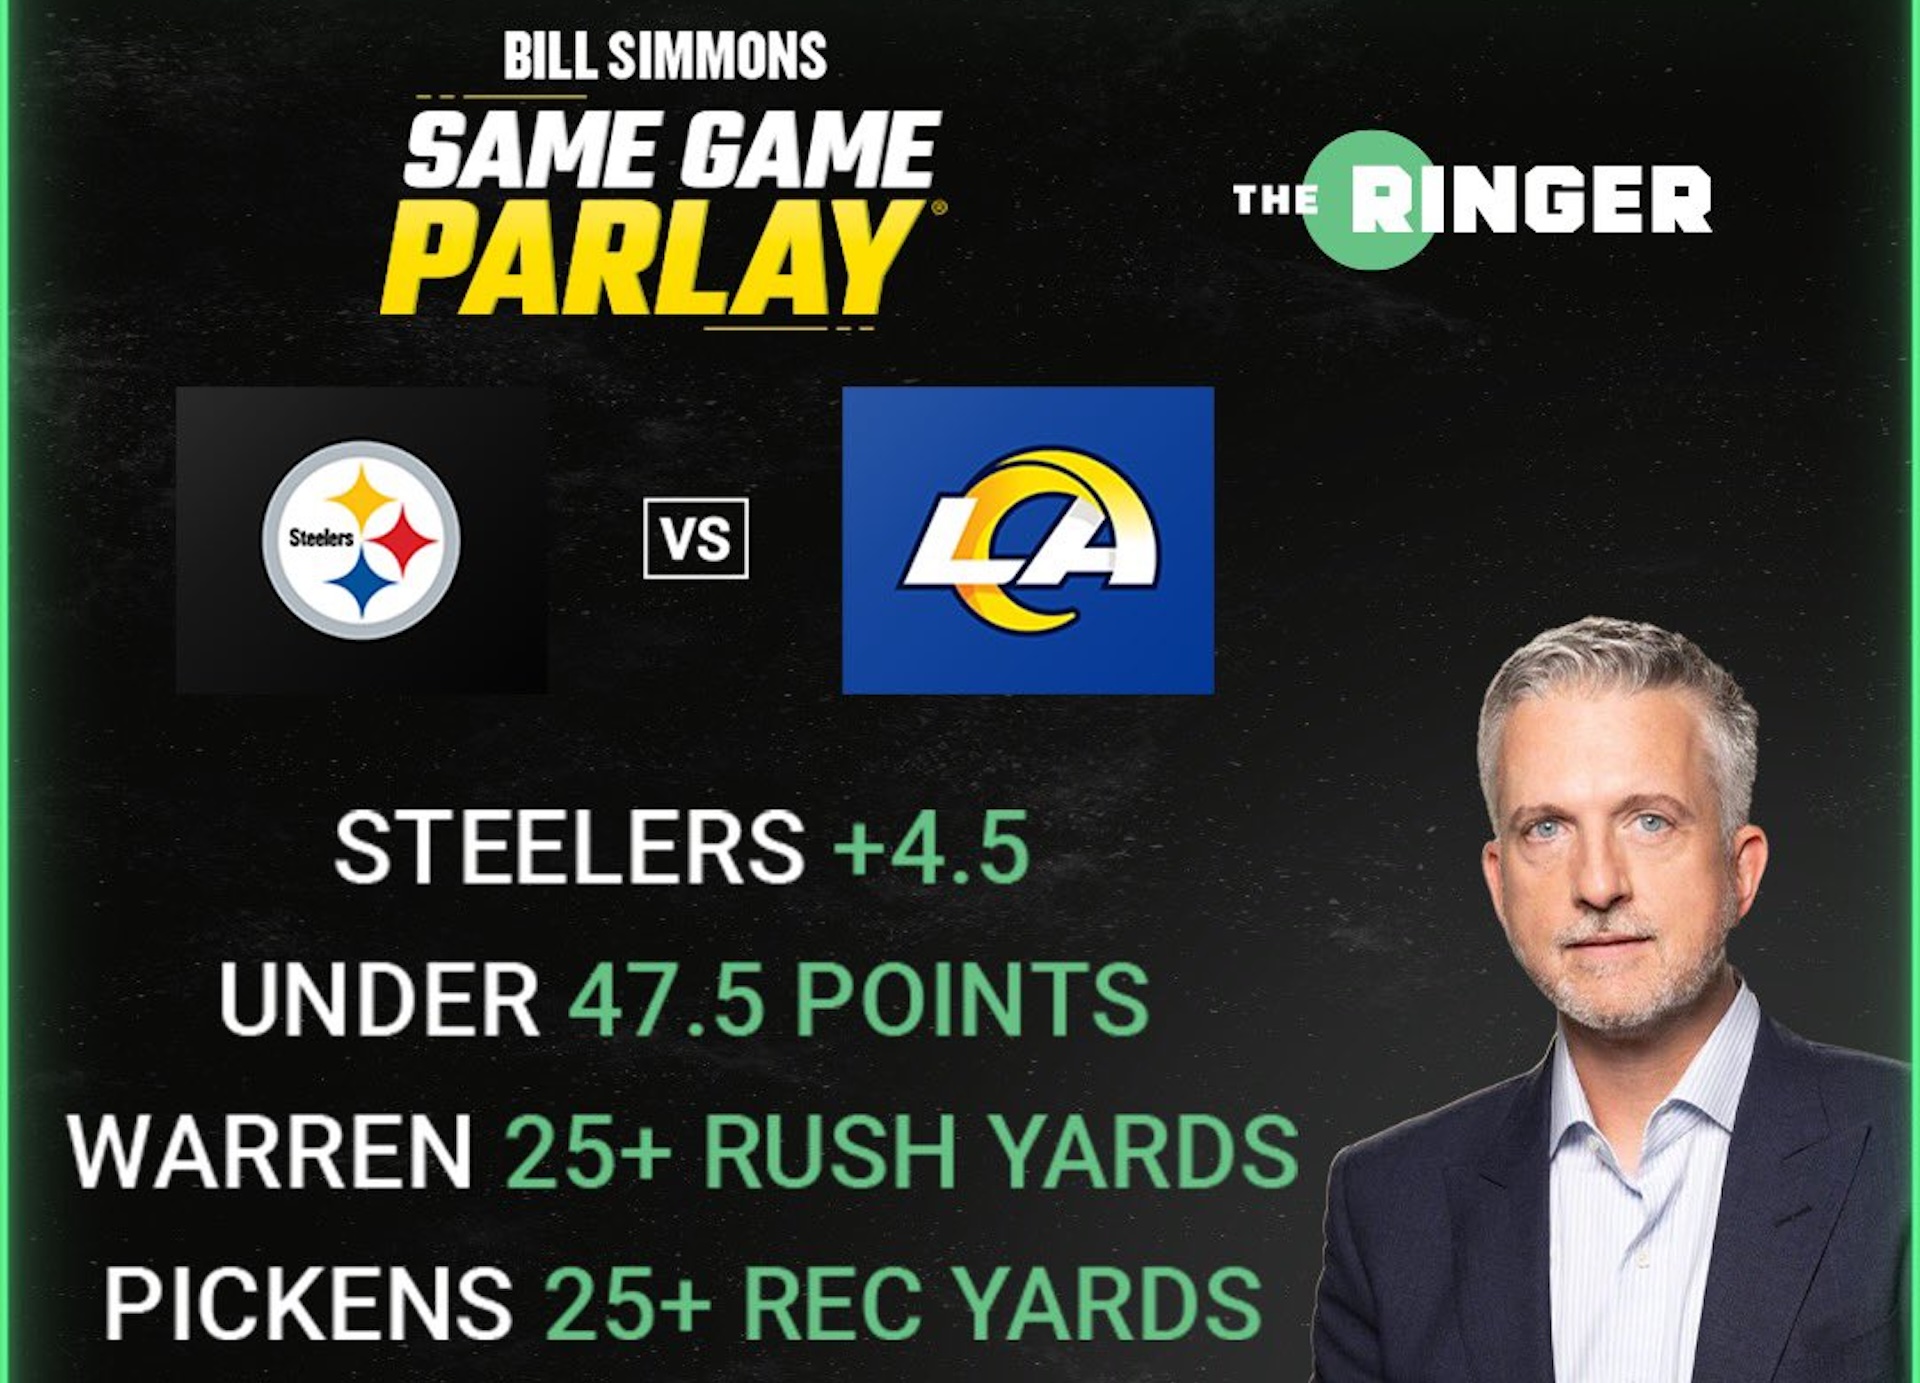 Bill Simmons advertising a same-game parlay.